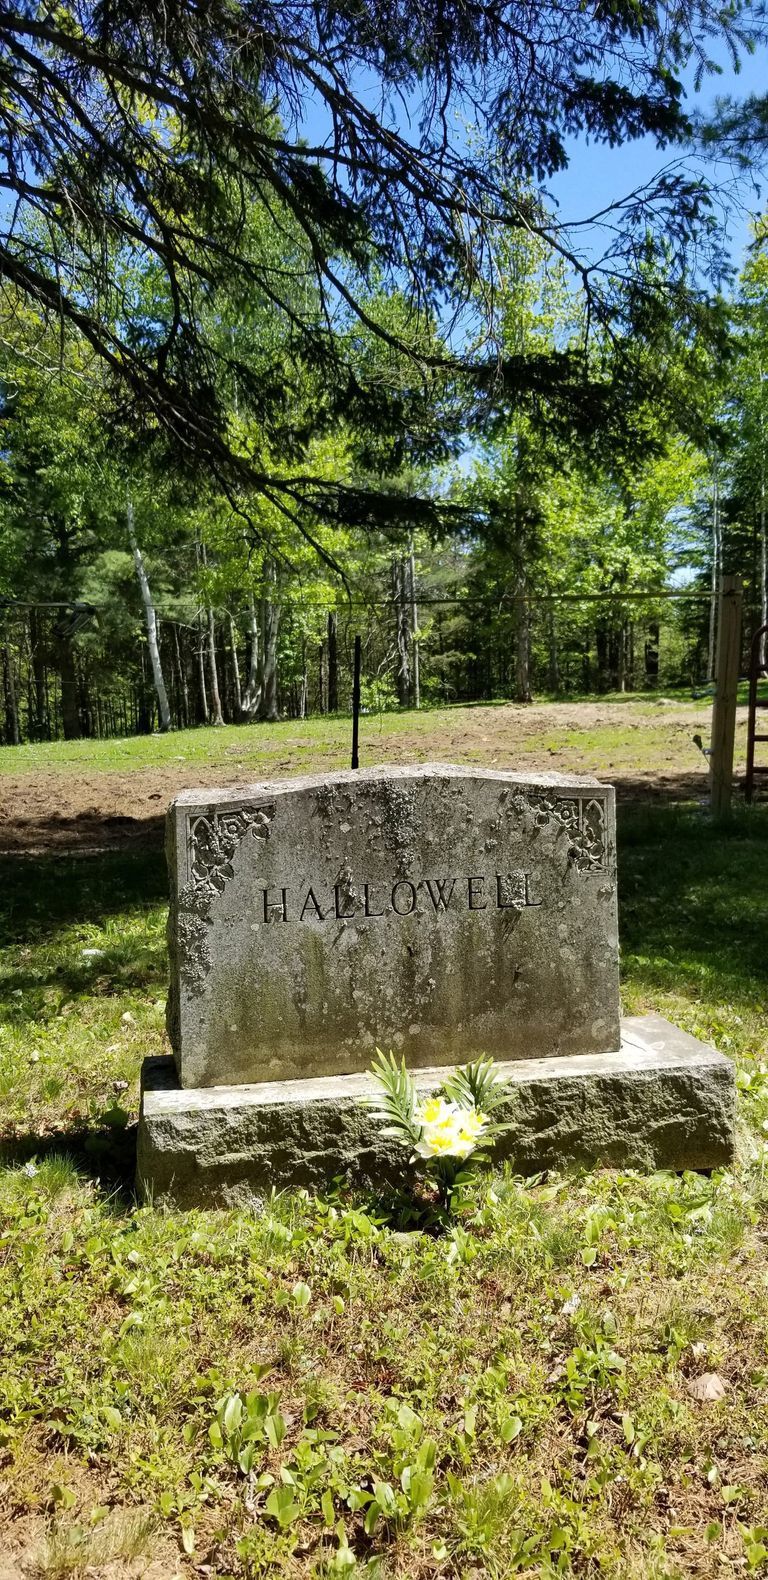          Hallowell Family Gravestone in Edmunds, Maine; The stone was placed as a memorial to his family by Alton Hallowell of Edmunds, Maine. The only surviving family members were Mrs. Hallowell and son Ira H. who was Alton's father.
   